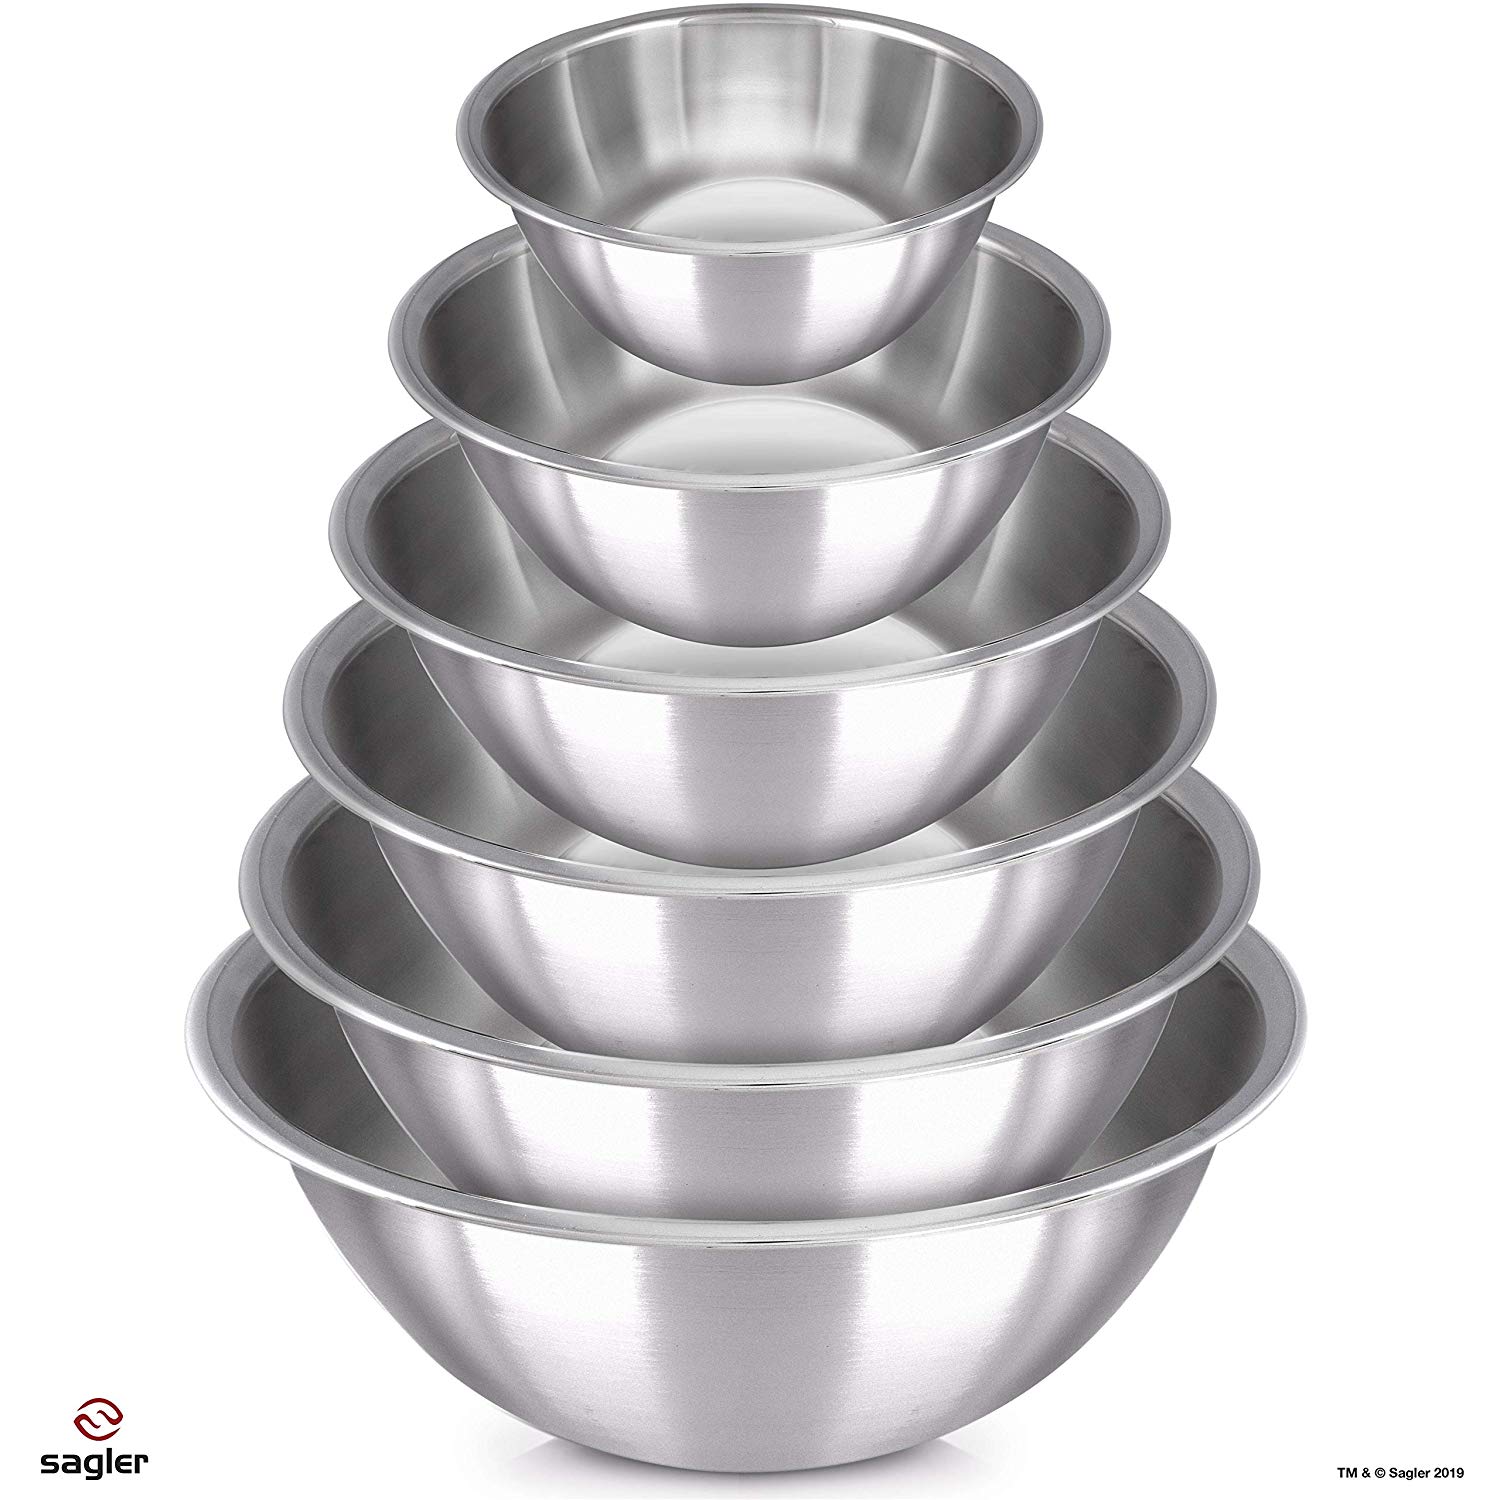 Home-it Set of 6 stainless Steel Mixing Bowls - image 4 of 5